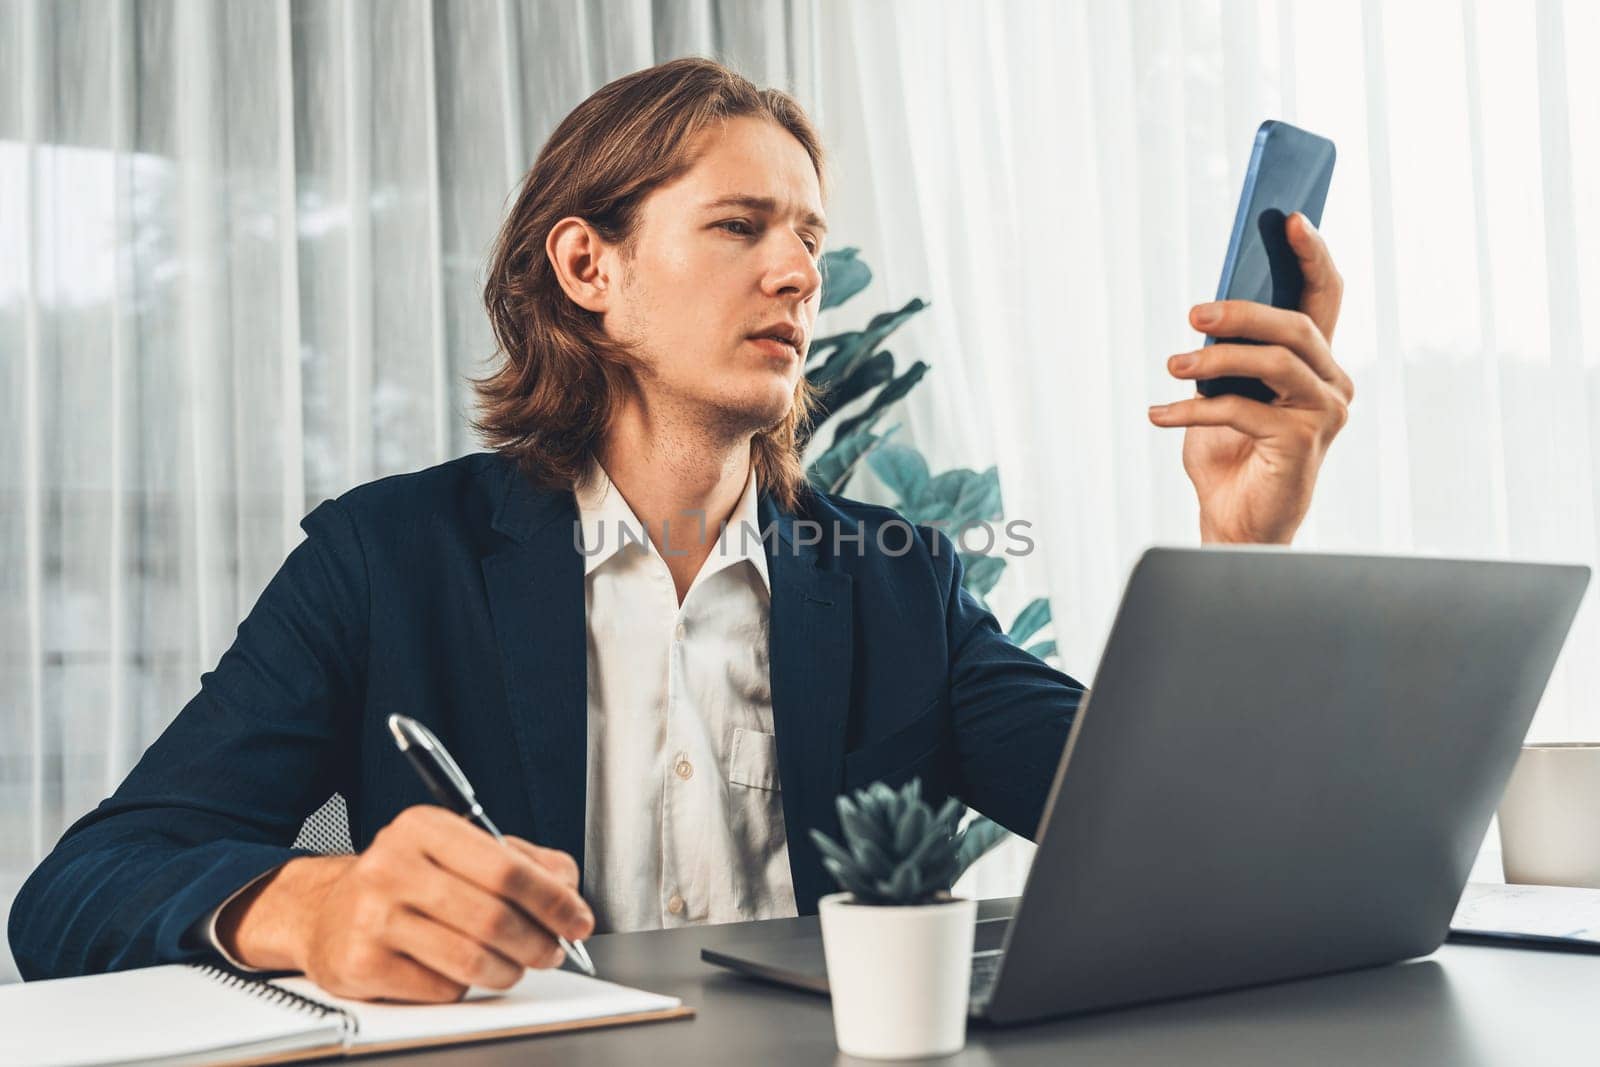 Hardworking and diligent businessman working on his laptop while talking to clients on his mobile phone, showcasing modern multitasking office worker lifestyle. Entity